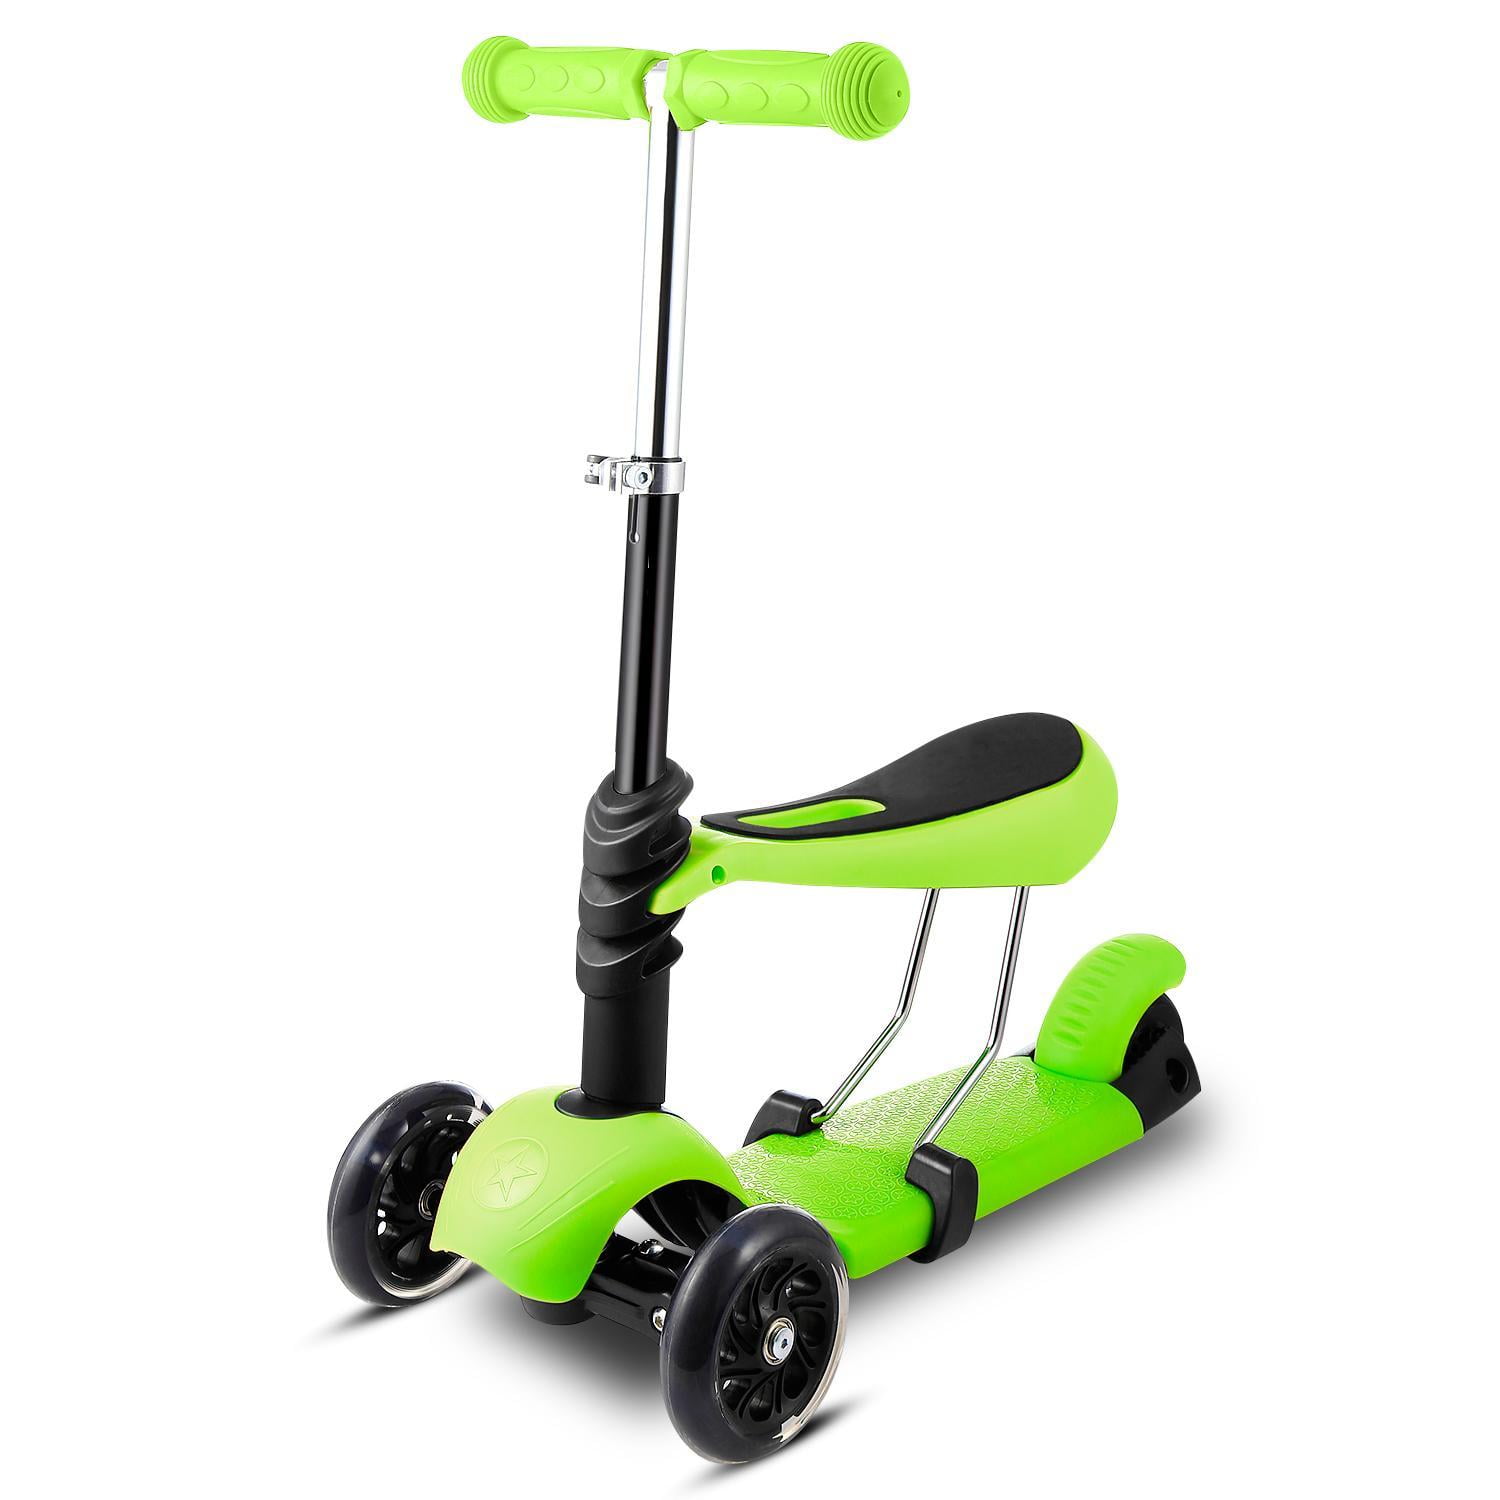 wheel scooter for kids